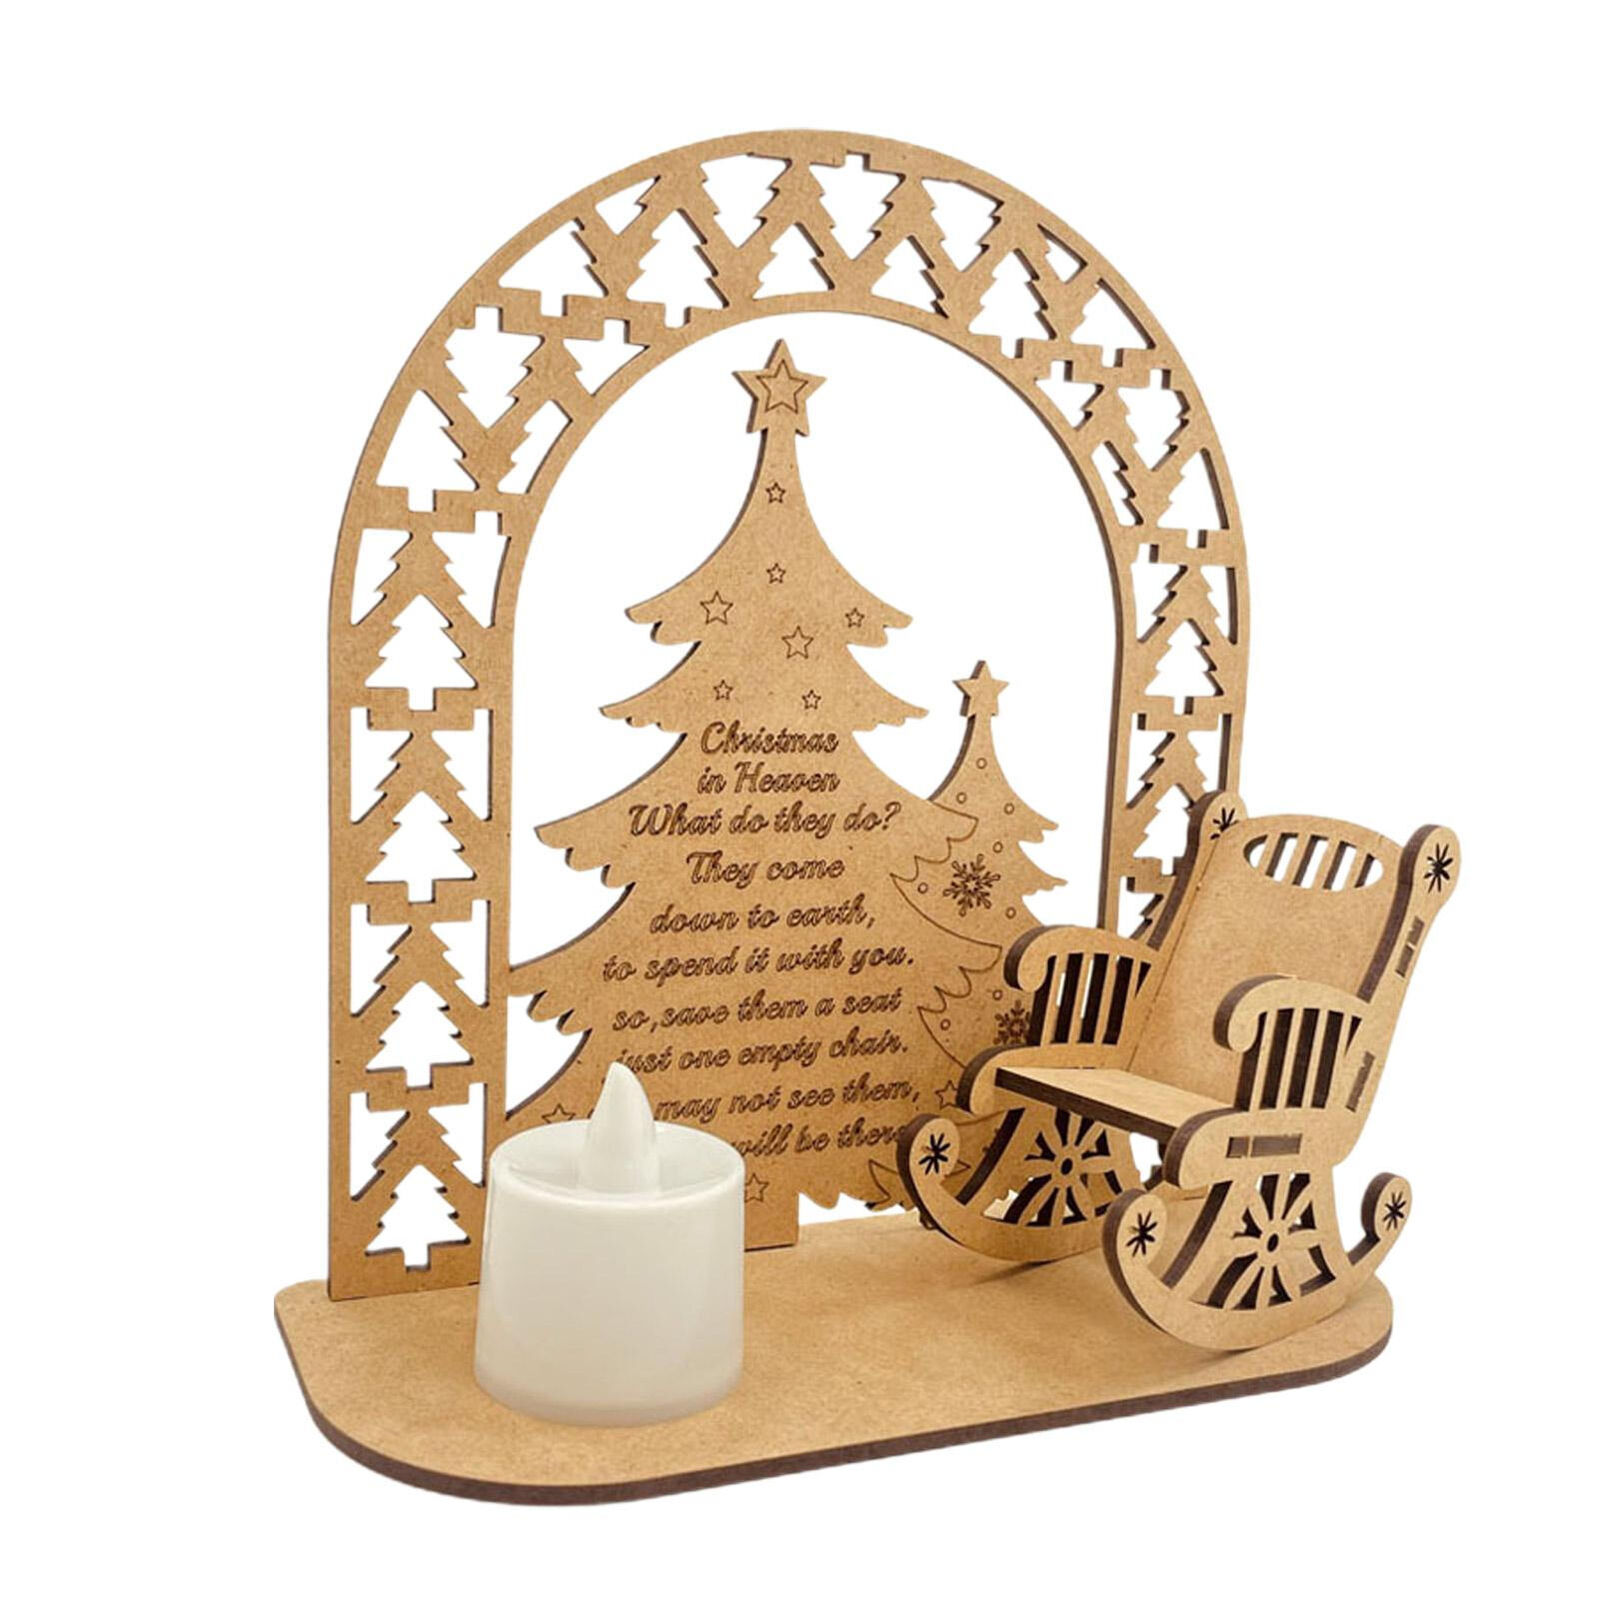 Wooden Christmas Memorial Rocking Chair And Candle Holder Ornament Decoration